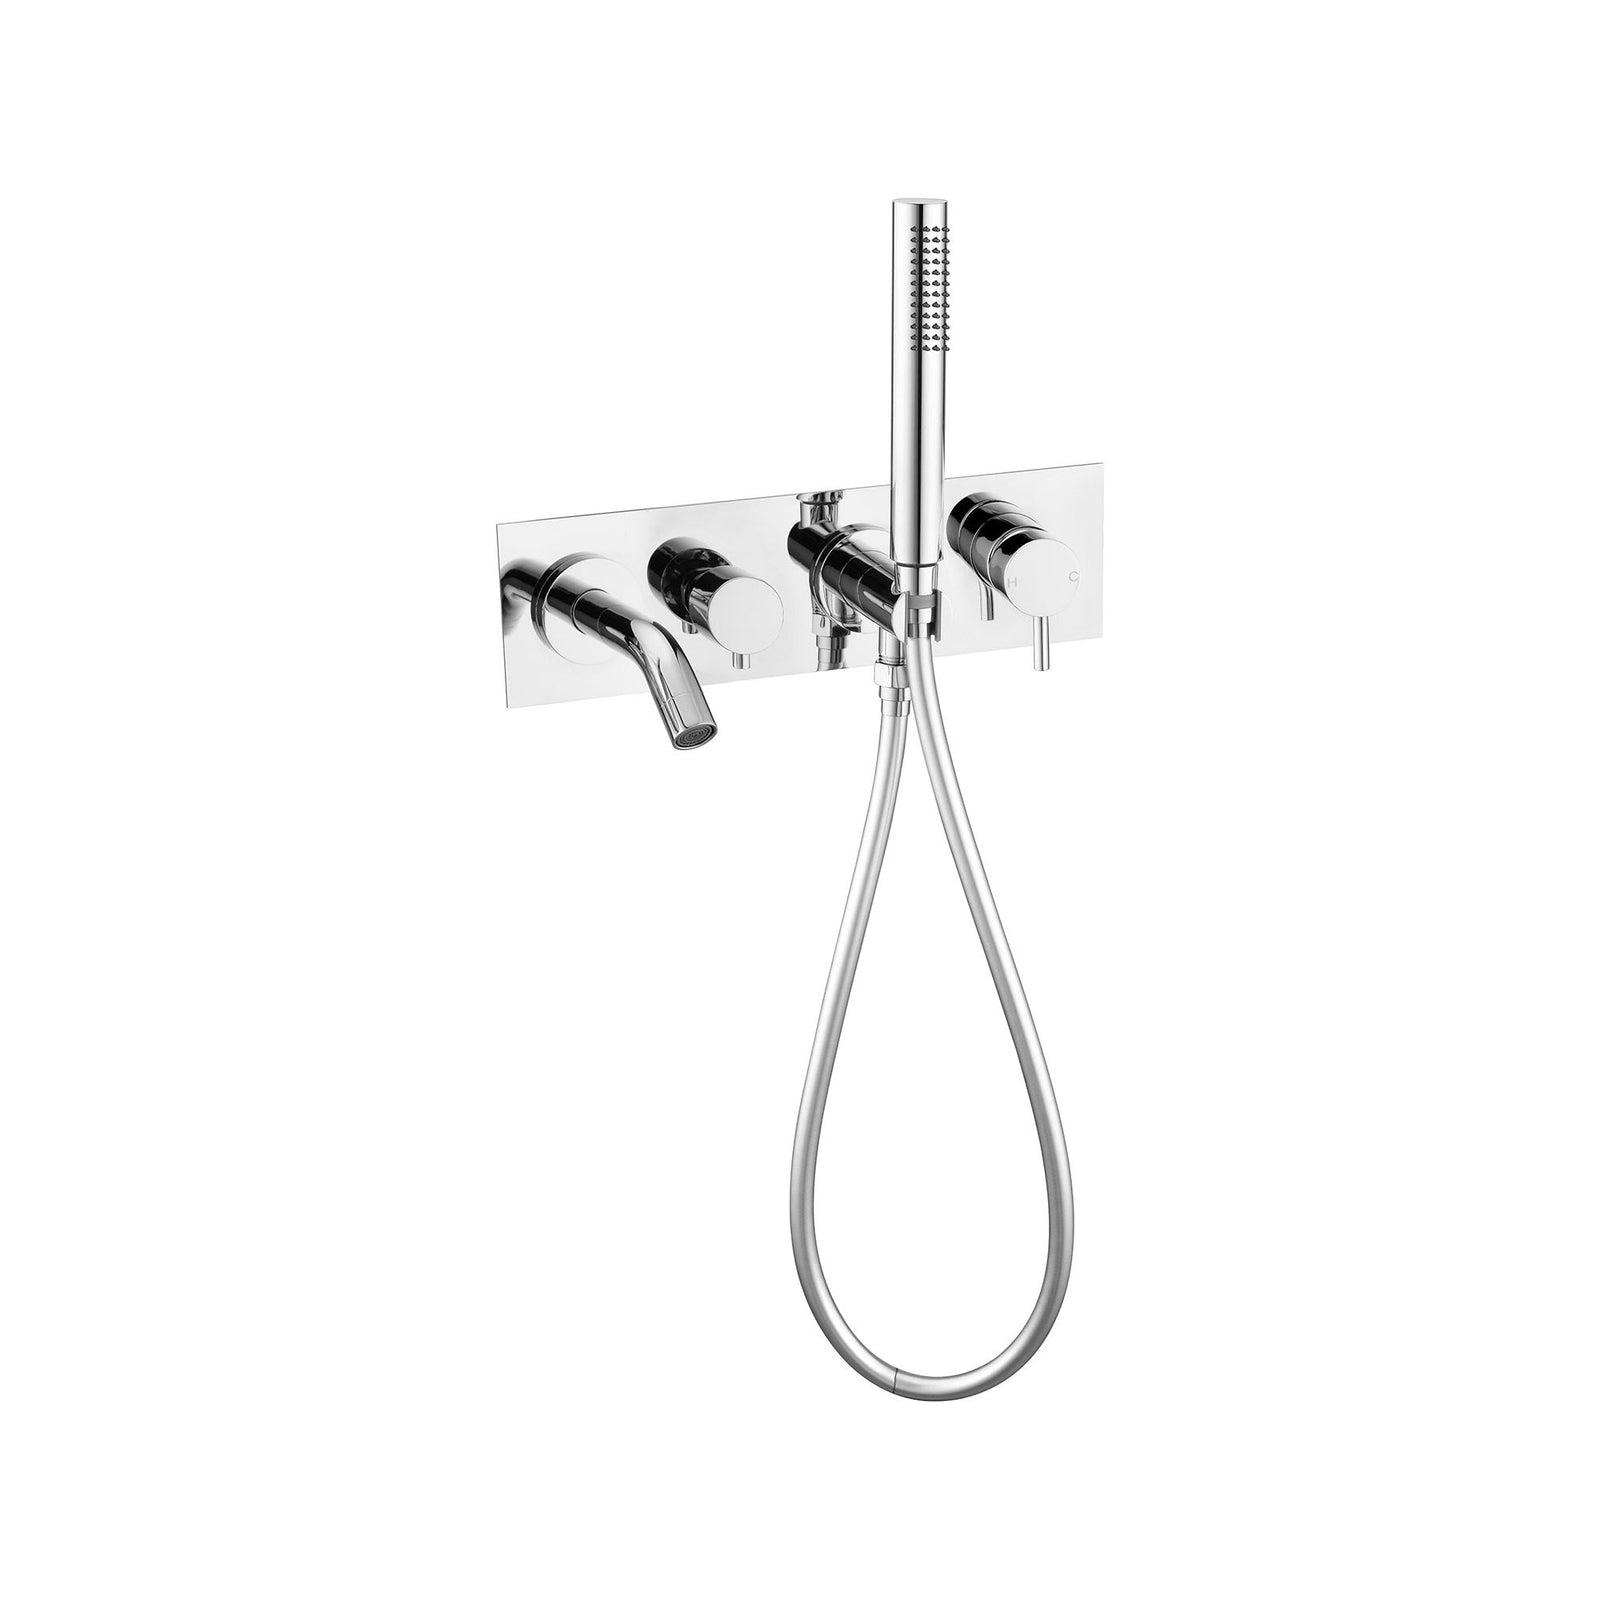 Wall mounted bath mixer with handshower